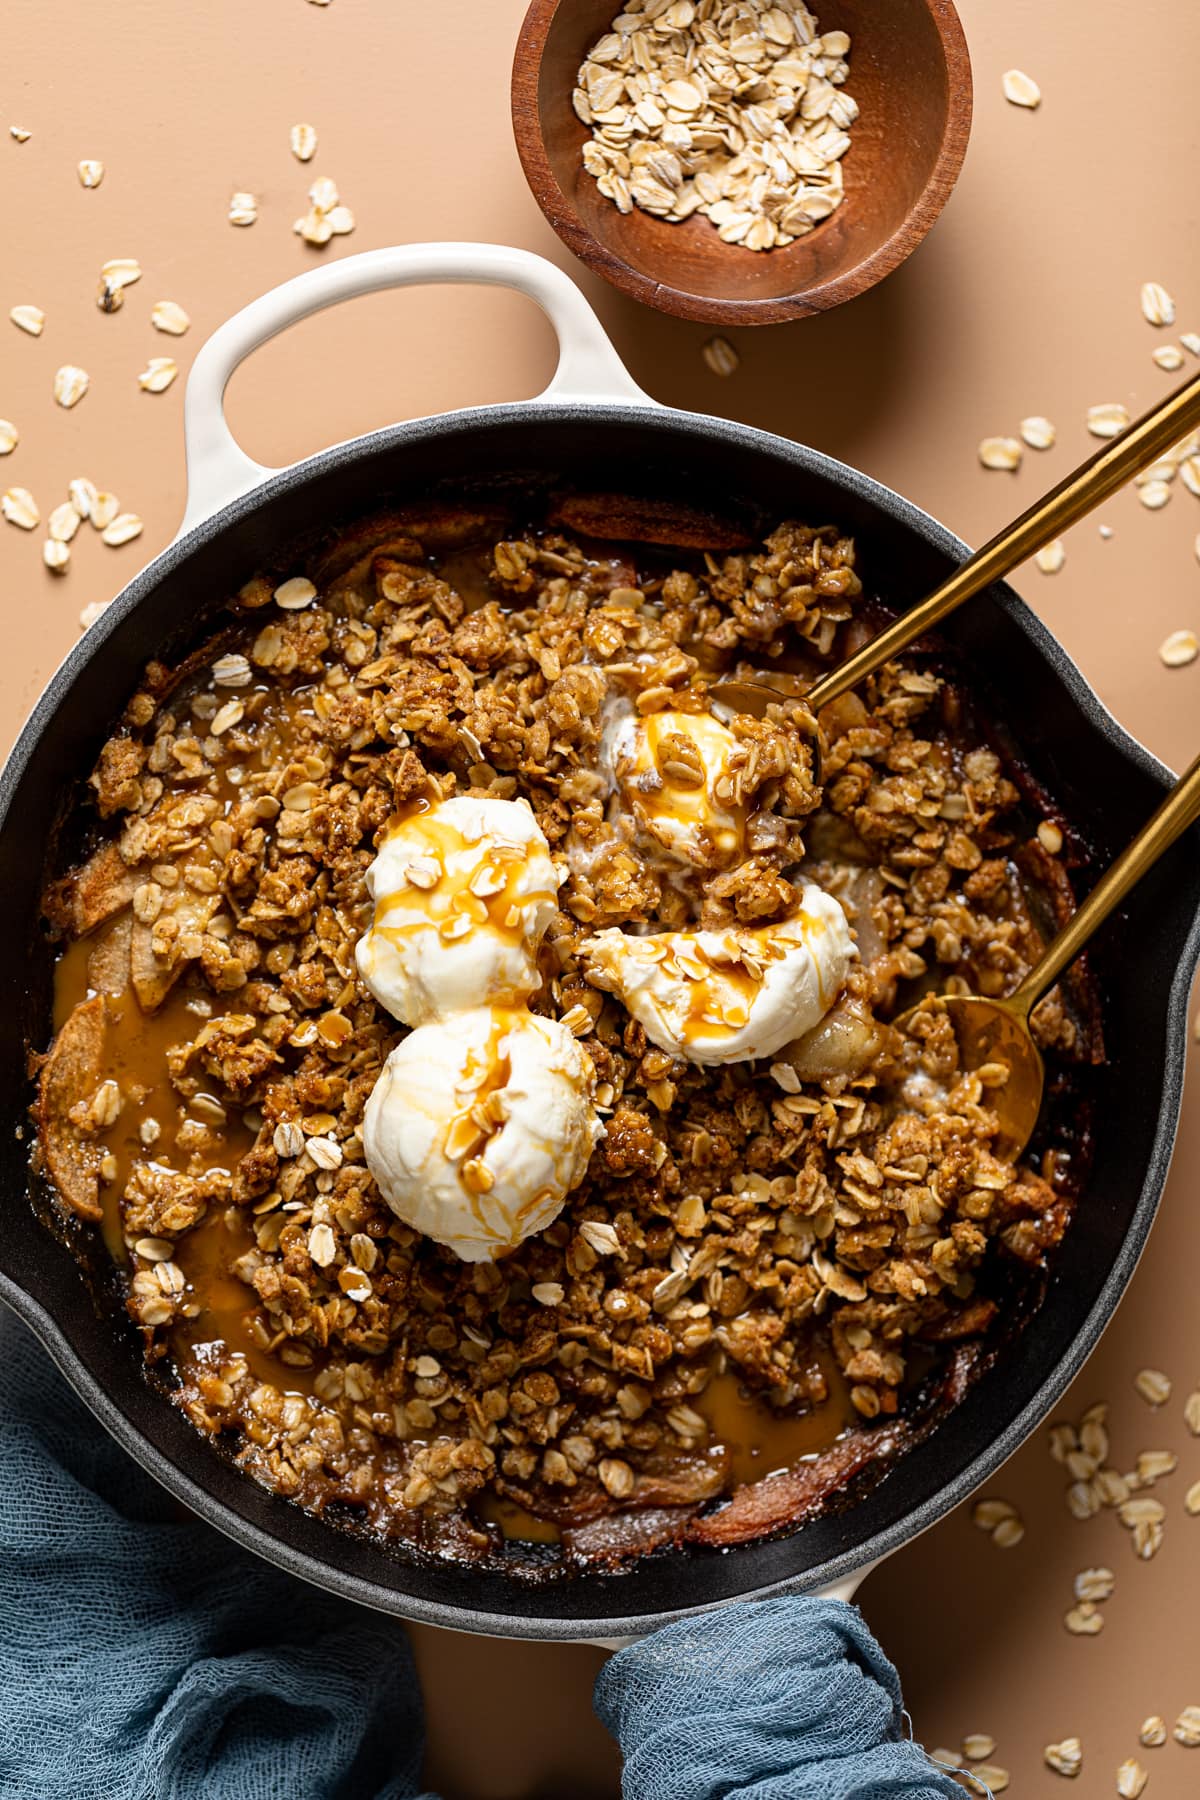 Homemade crisp with ice cream topping and two spoons with oats in a bowl.